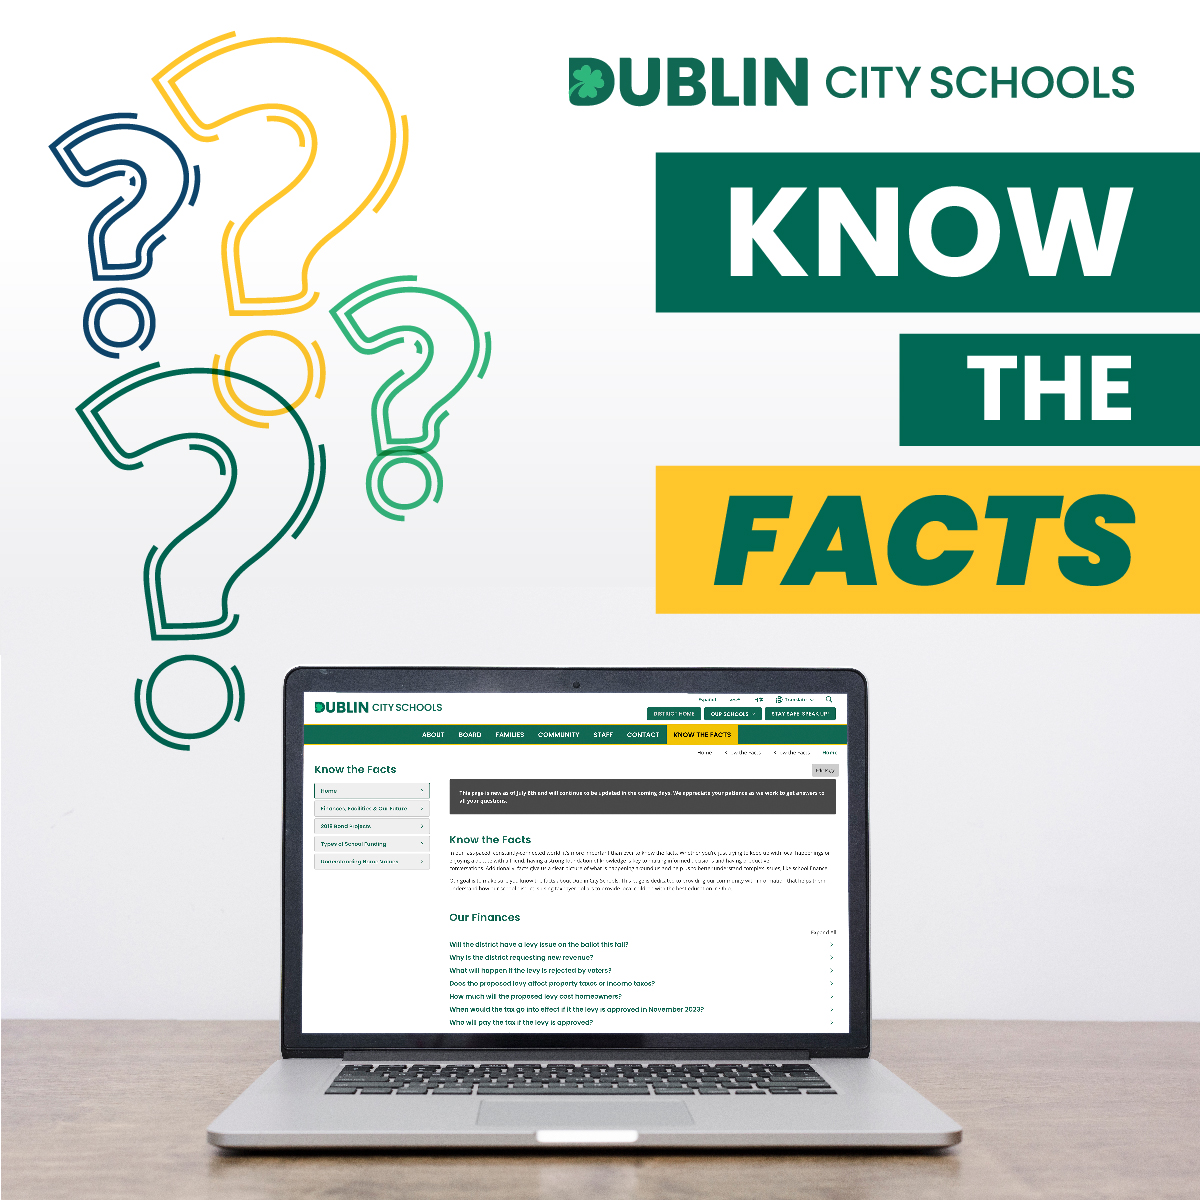 Did you know we have a new addition to our DCS homepage? Click the 'Know the Facts' button to learn about our district's finances, facilities and future. Check back often for answers to the latest questions. tinyurl.com/dcsfacts